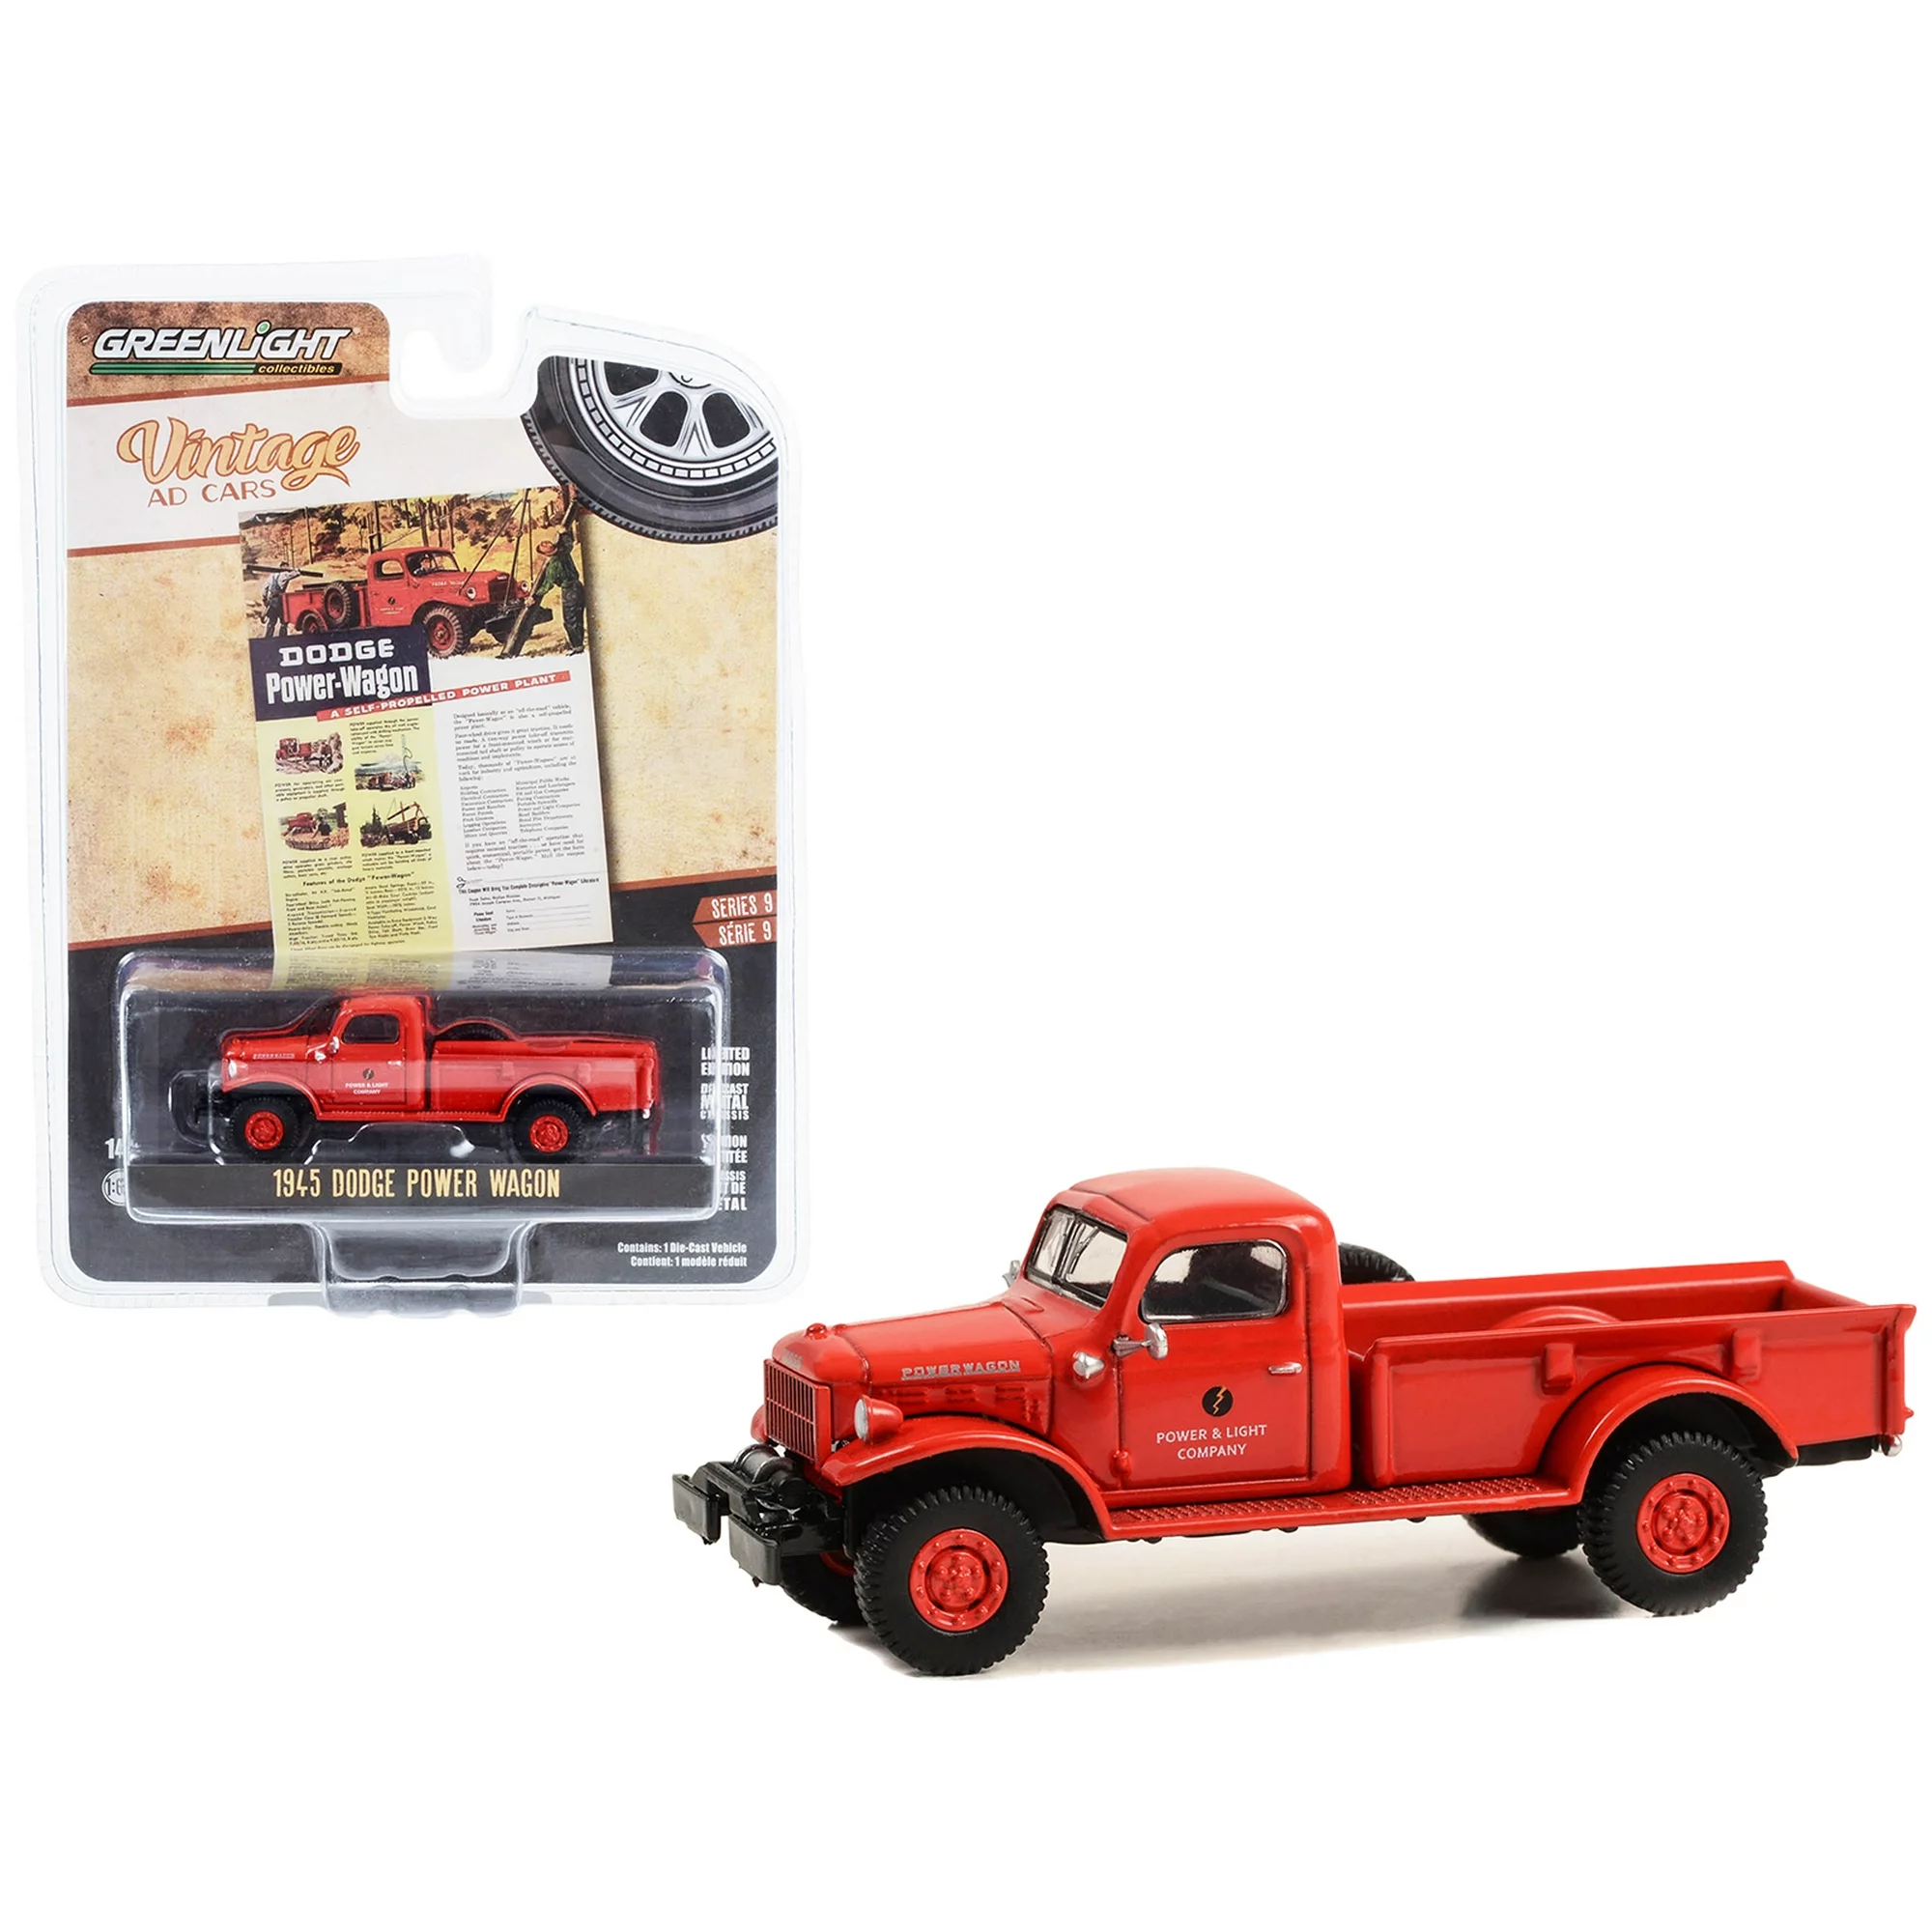 Greenlight 1/64 Vintage Ad Cars Series 9- 1945 Dodge Power Wagon Pickup Truck Red 39130-A - Thumbnail